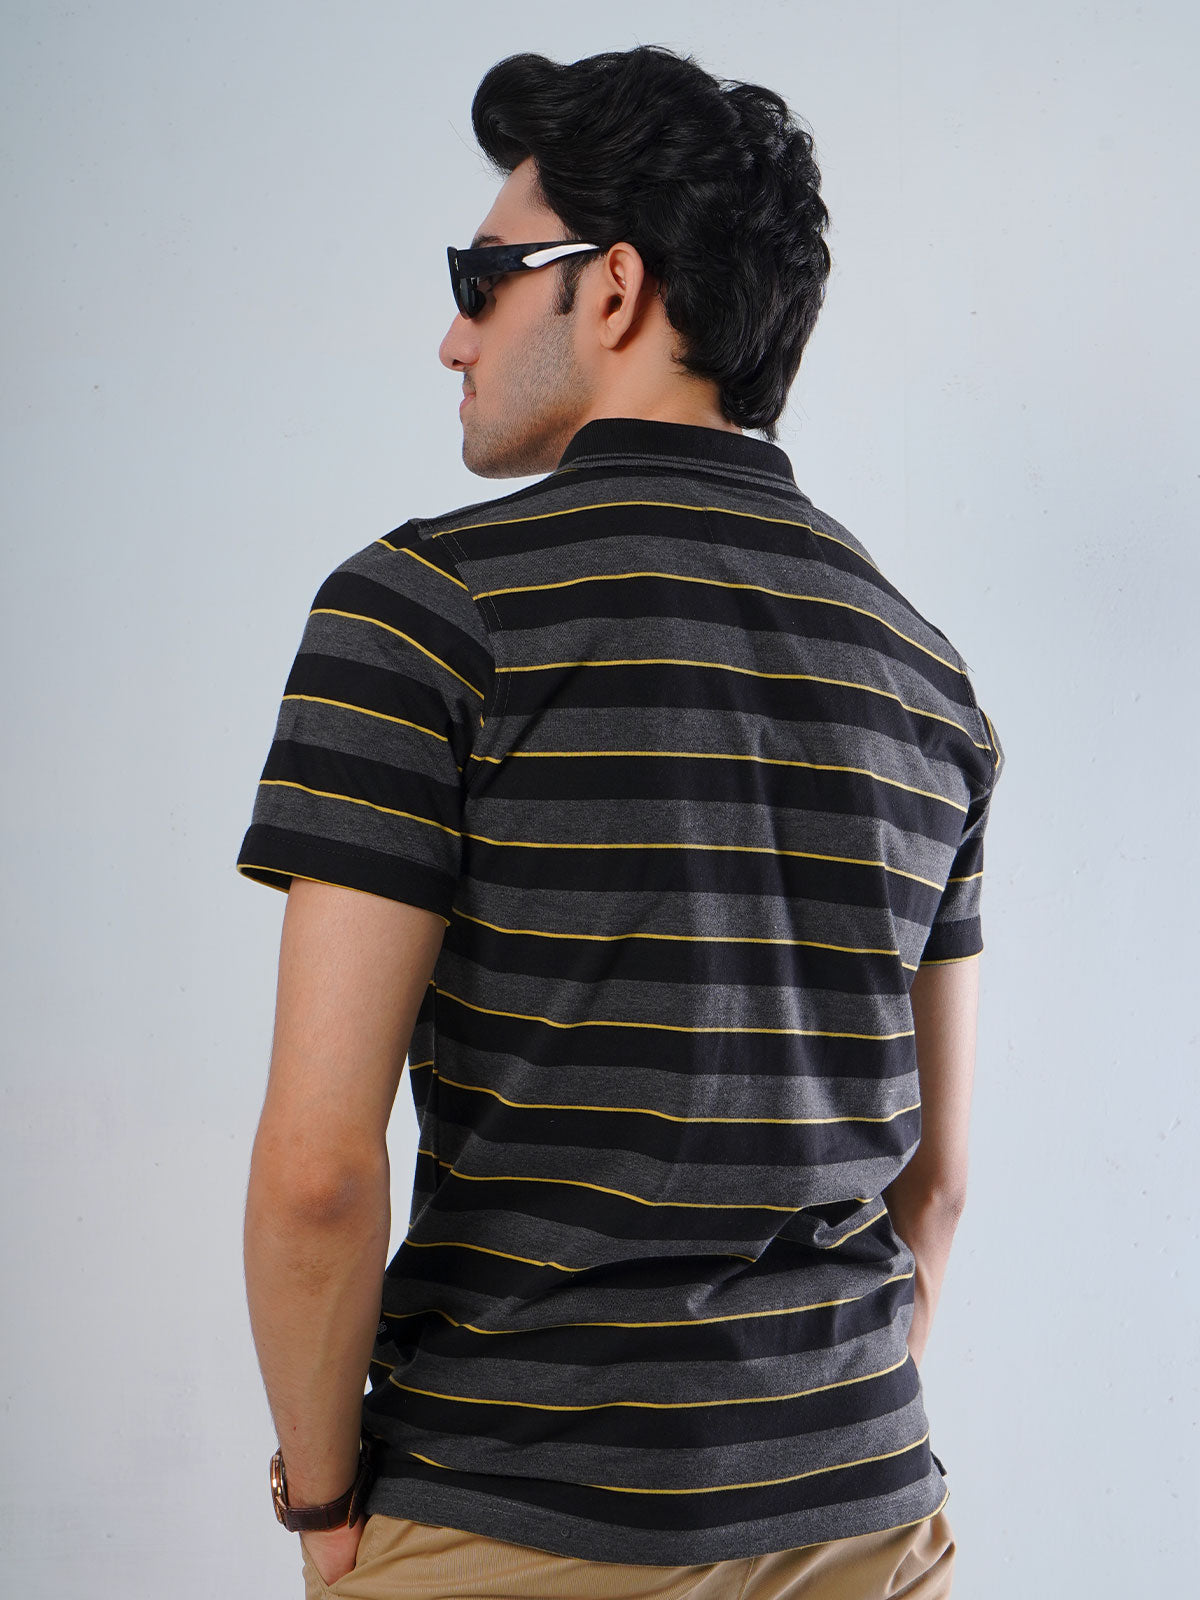 Charcoal Grey Contrast Tipping Collar Multi Color Half Sleeves Striped Polo T-Shirt (POLO-514)